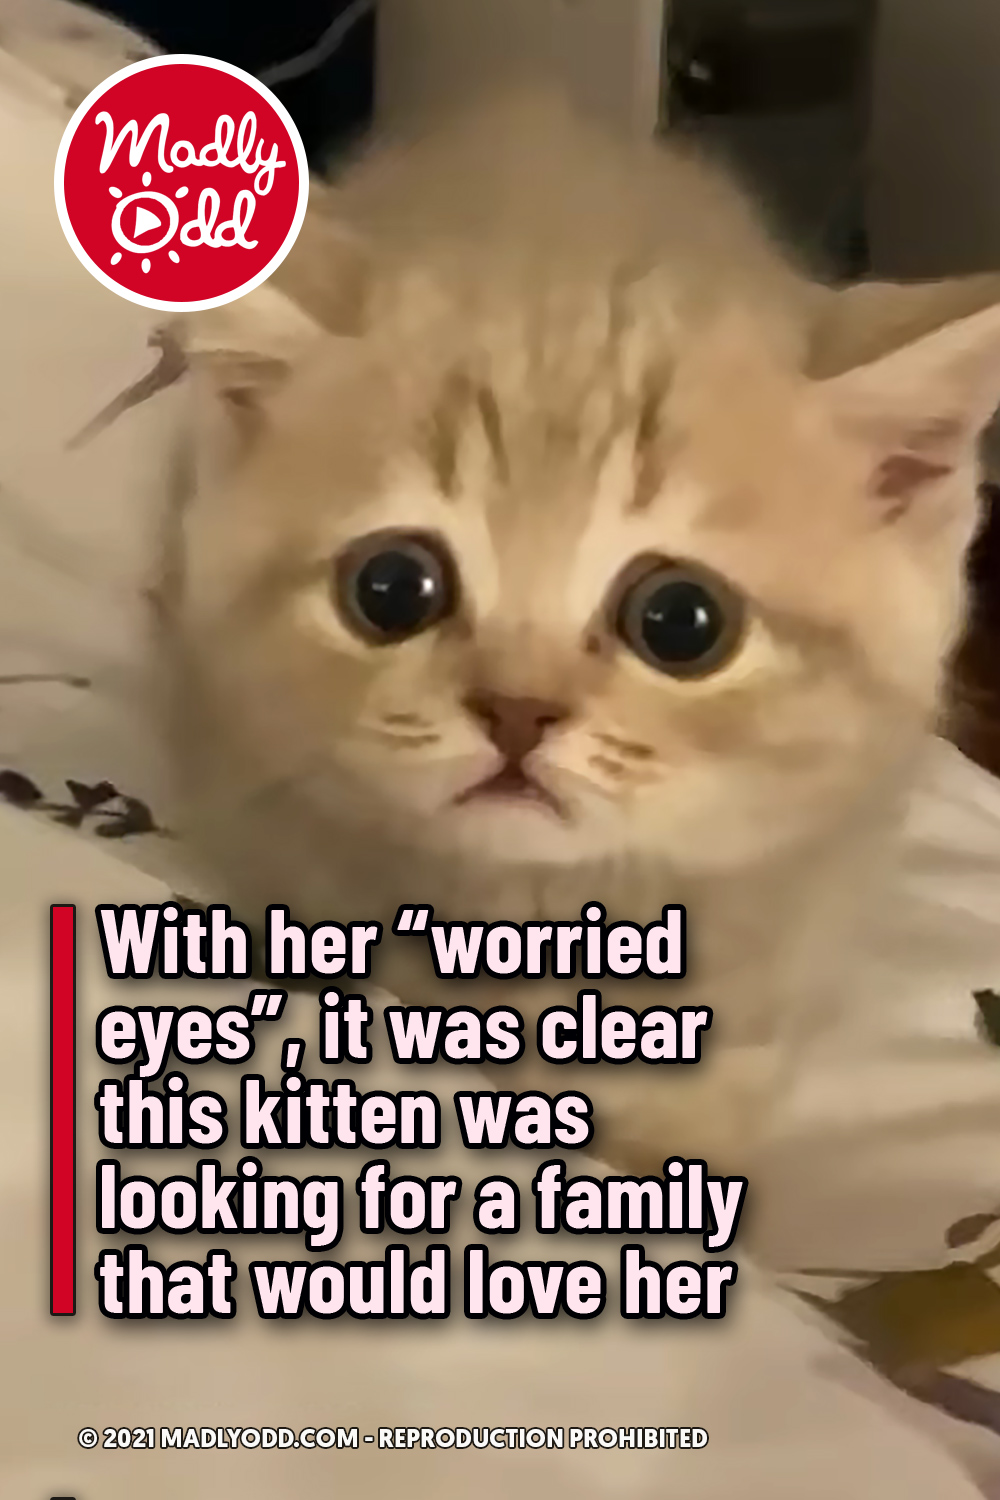 With her “worried eyes”, it was clear this kitten was looking for a family that would love her